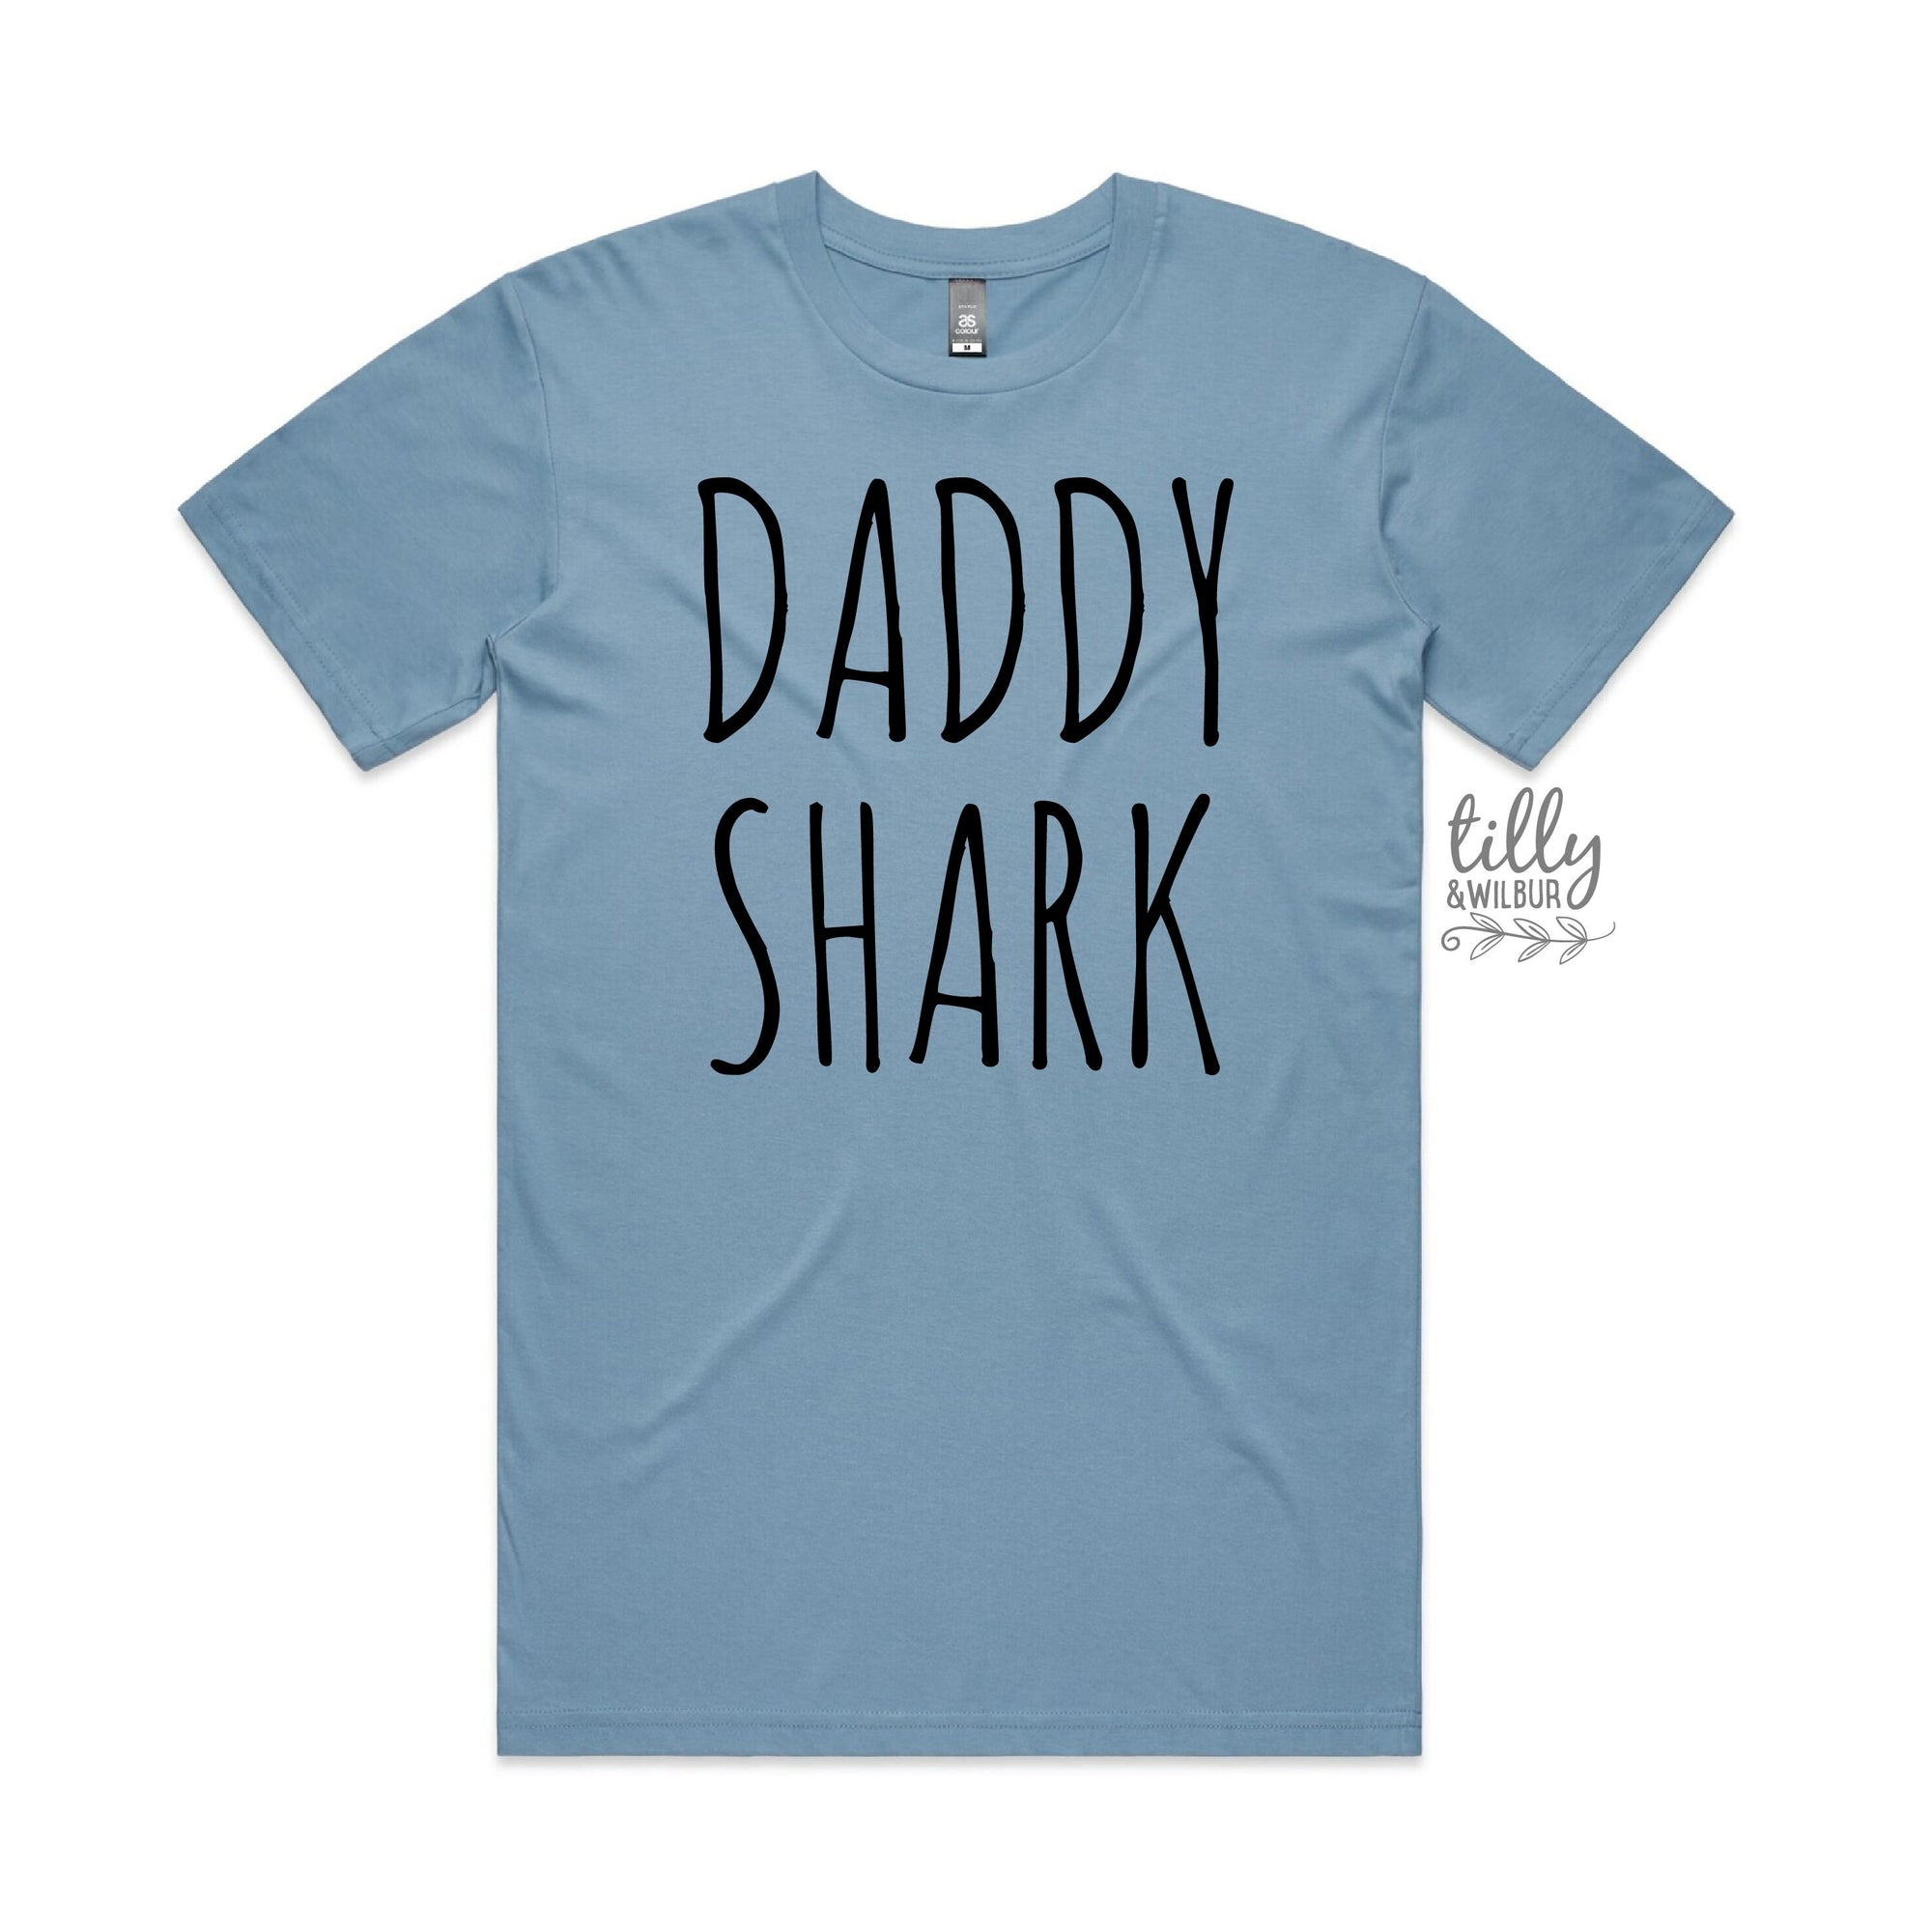 Daddy Shark T-Shirt, Matching Set Available, Matching Dad Baby, Daddy & Me, Daddy Daughter, Father's Day Gift, Christmas Gift, Baby Shark